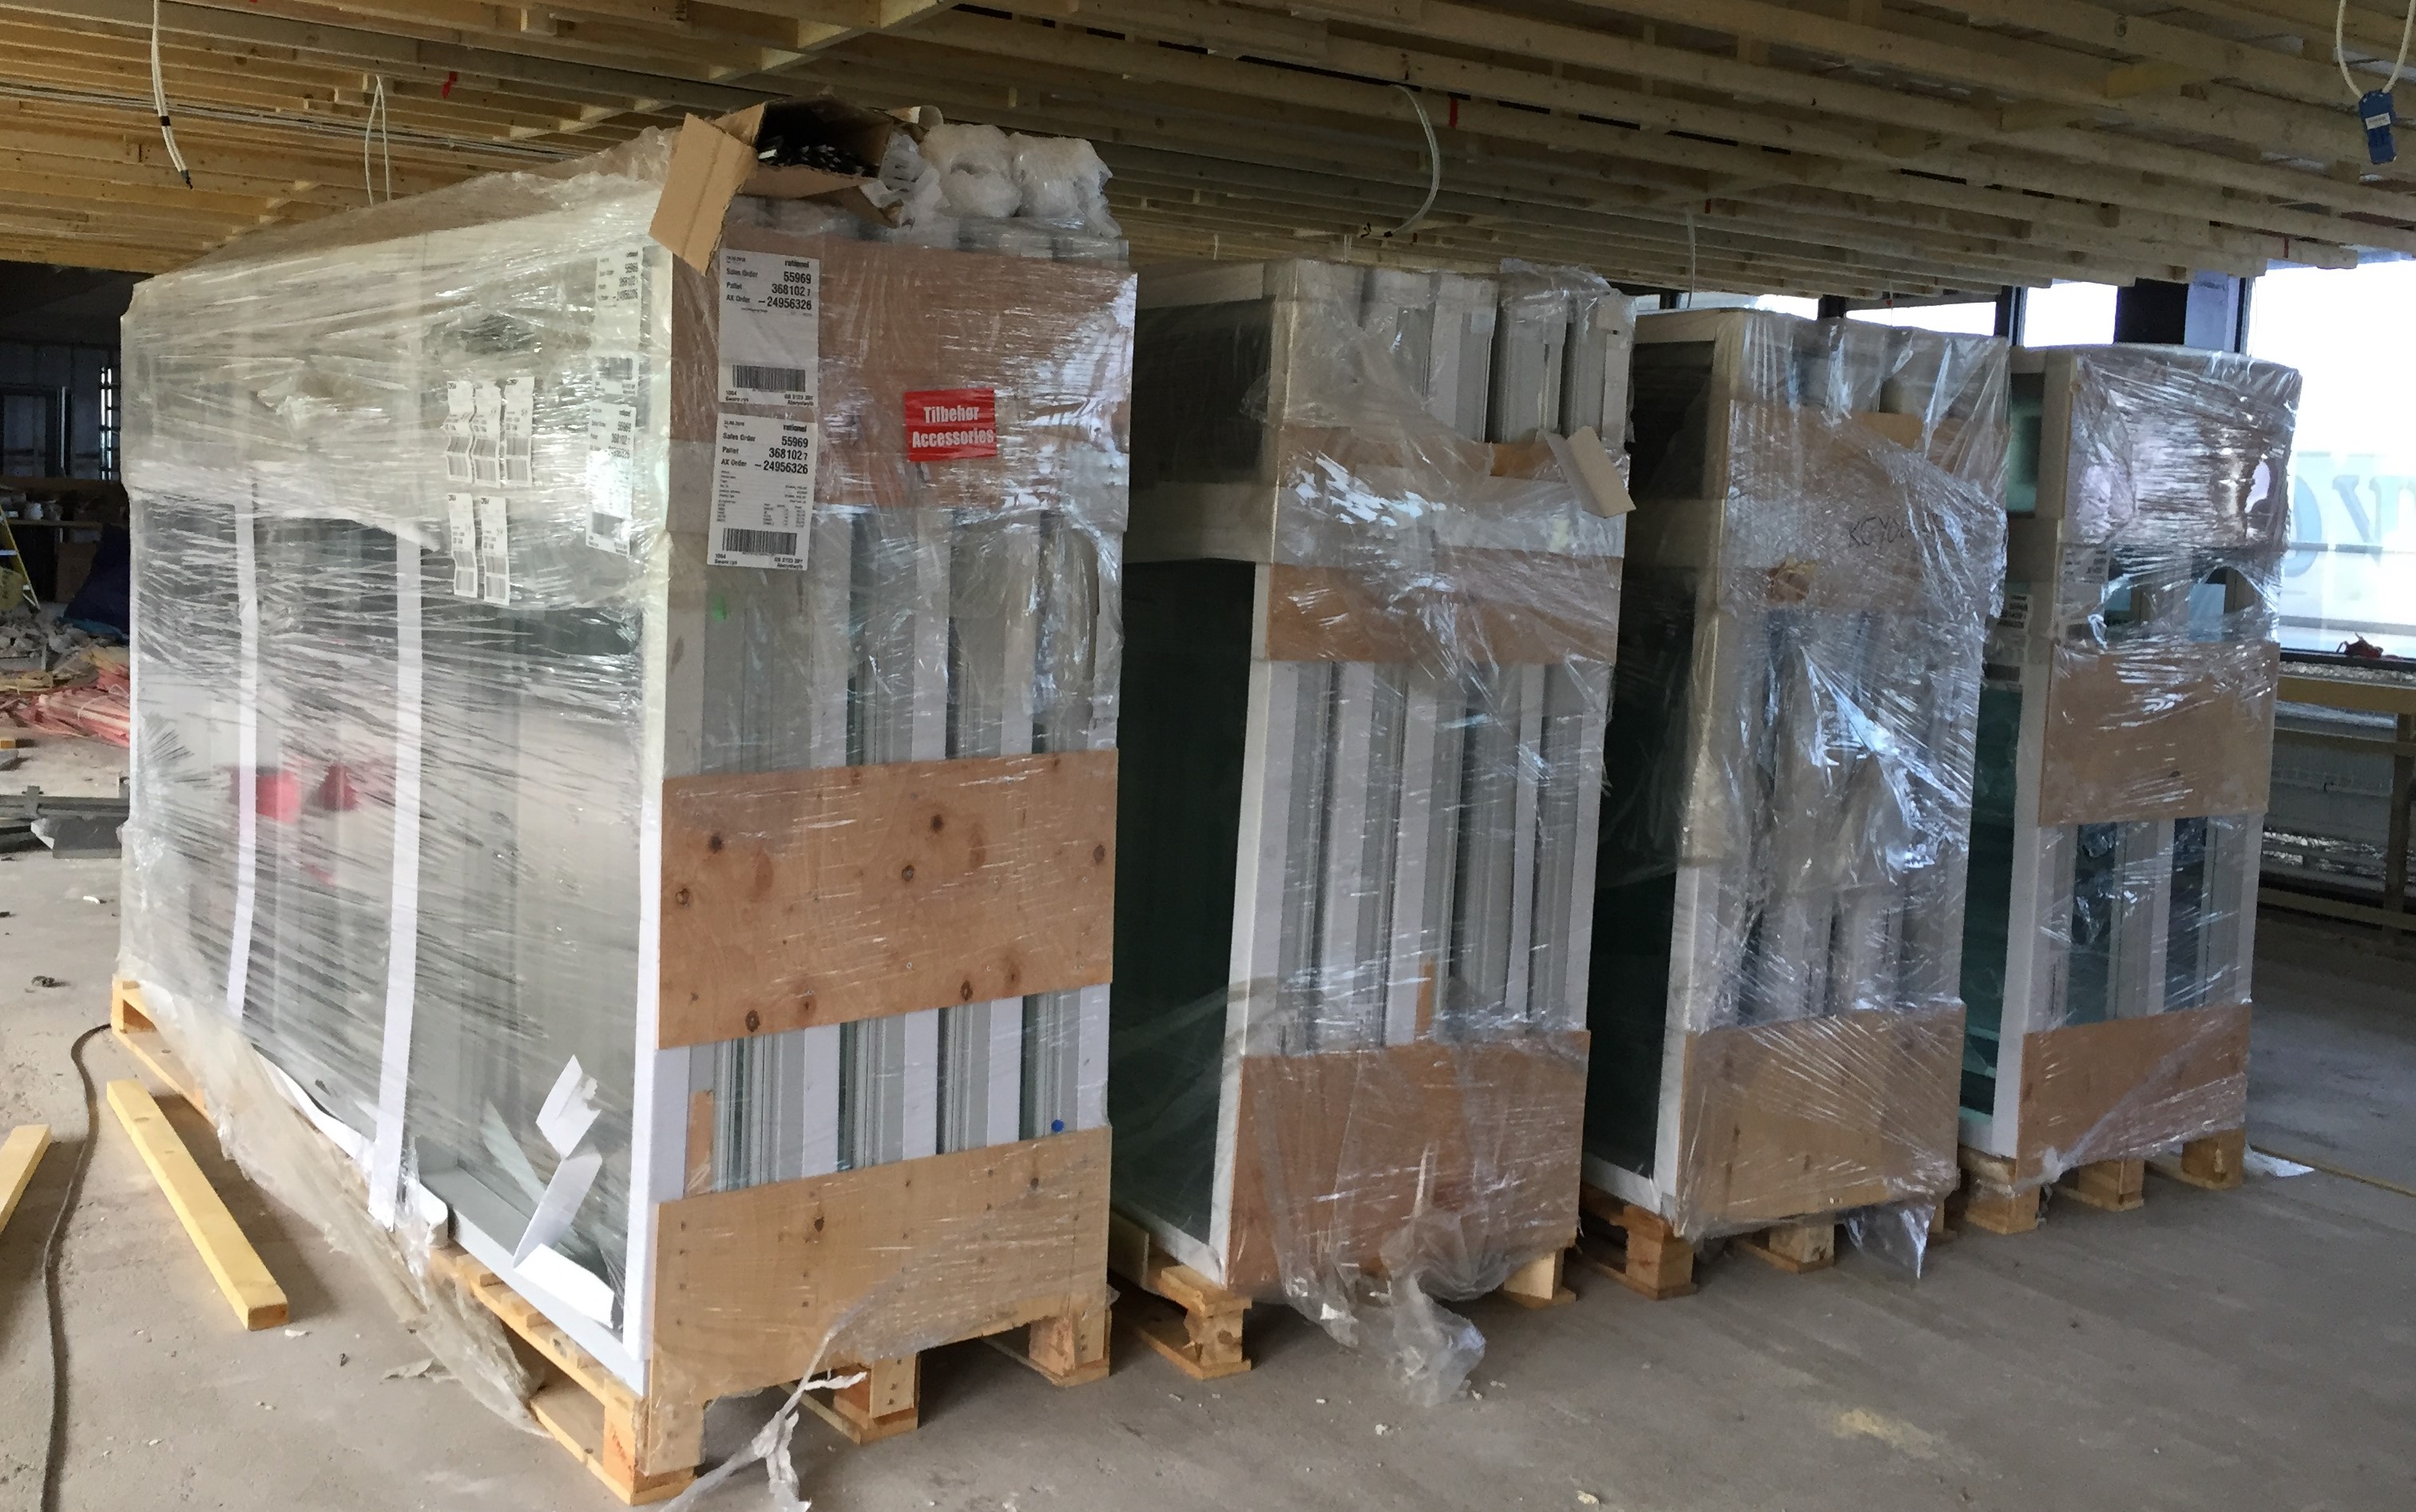 new windows delivered, ready to unpack